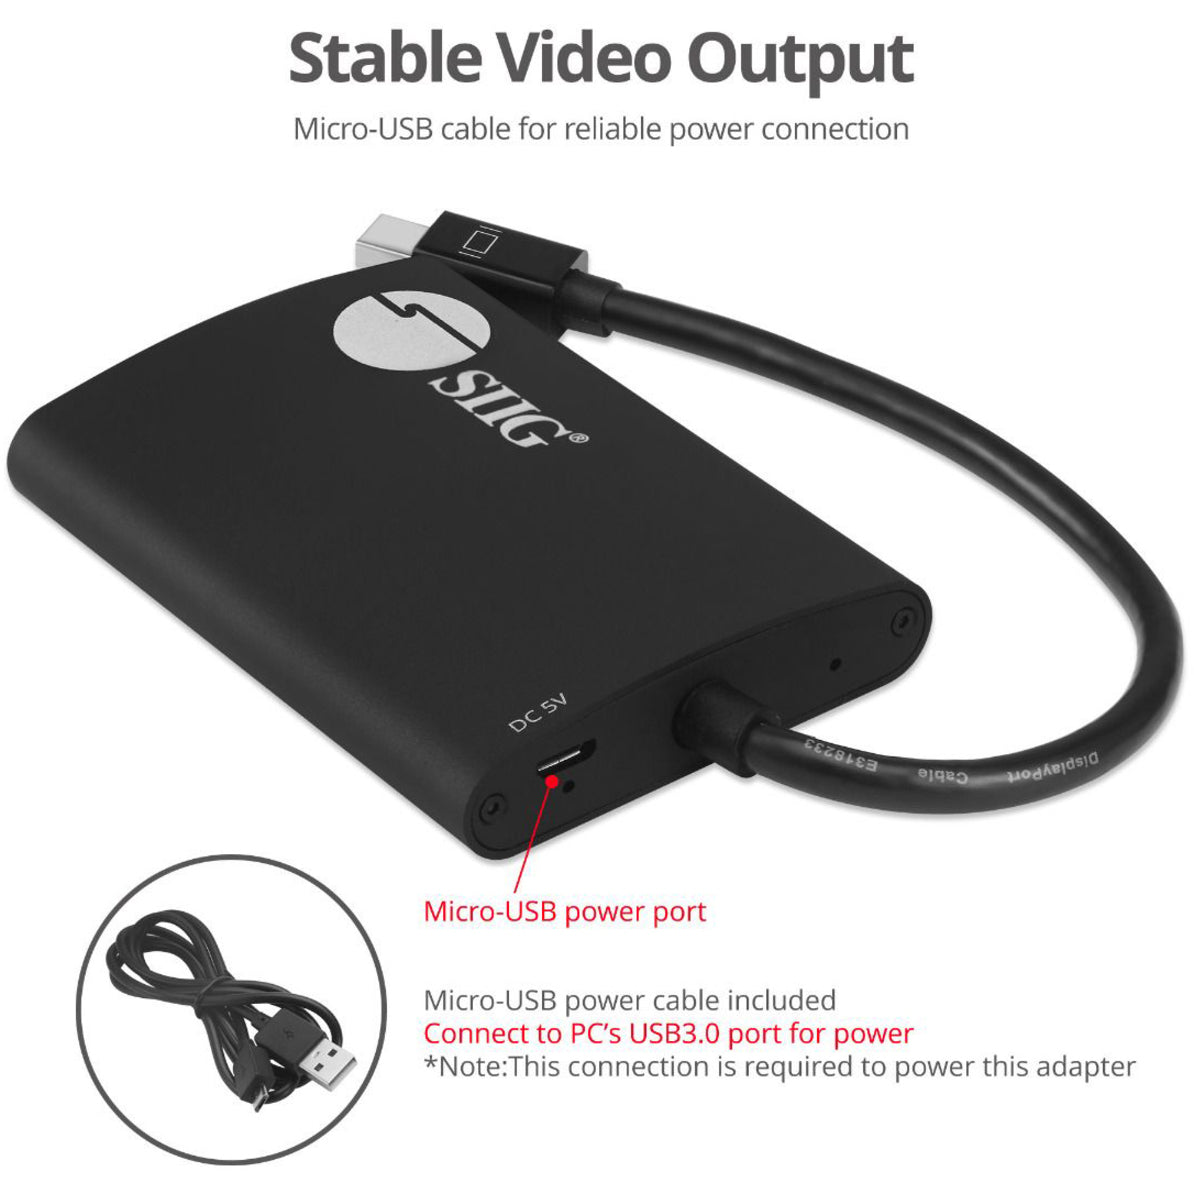 SIIG CE-DP0L11-S1 1x2 mDP 1.2 to HDMI MST Splitter, Connect 2 HDMI Monitors from a Single Mini DP 1.2 Port